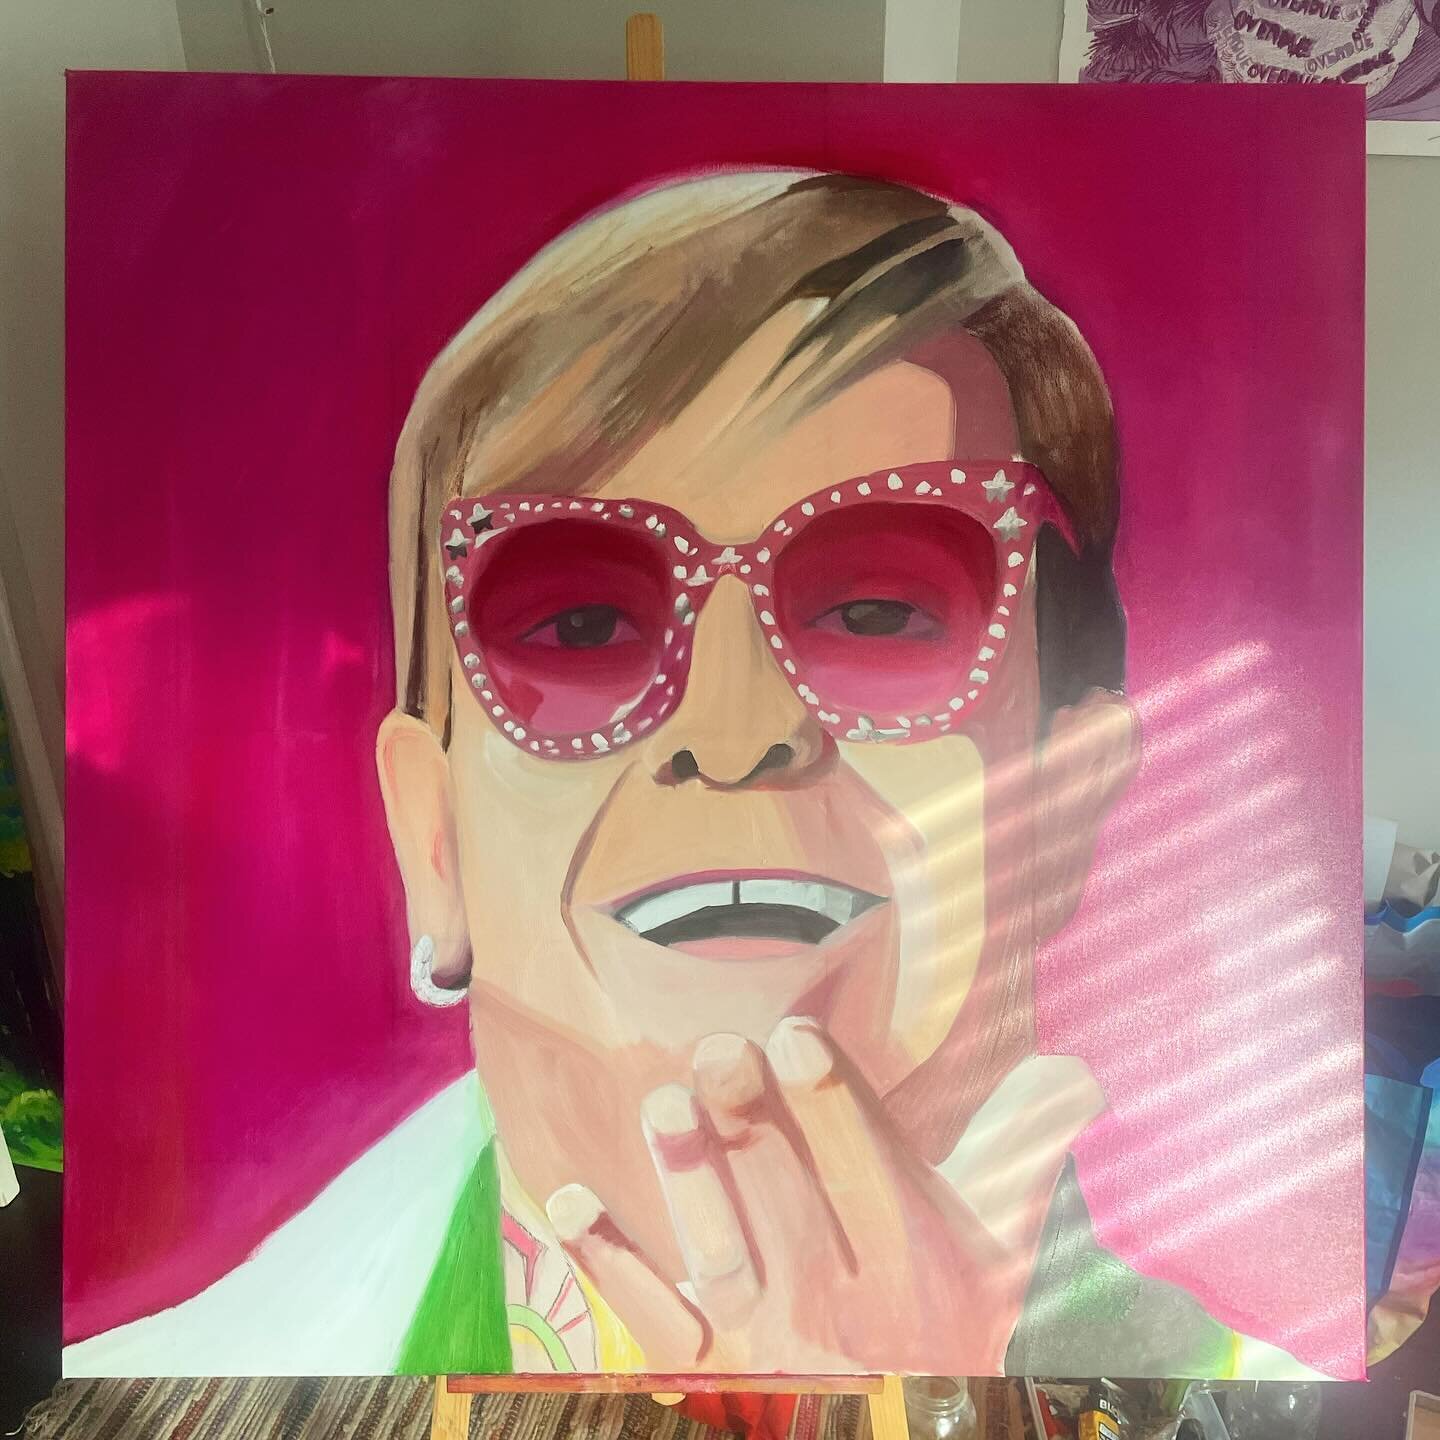 my first commission for the biggest elton john fan i know :)

oil on 4ftx4ft canvas :)